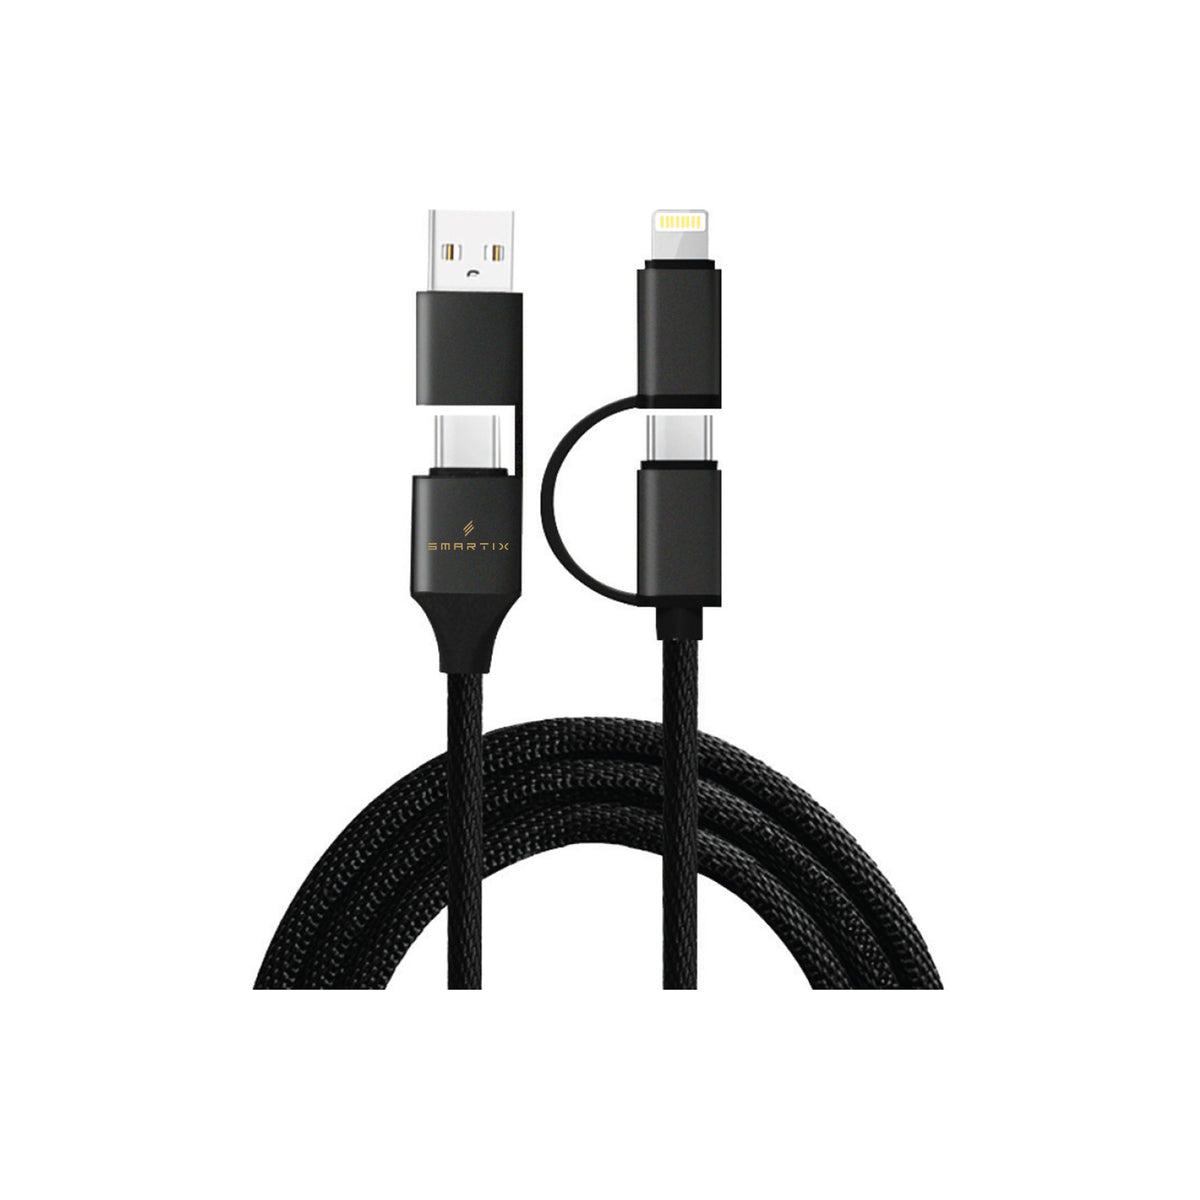 3 in 1 Cable - Smart Infocomm